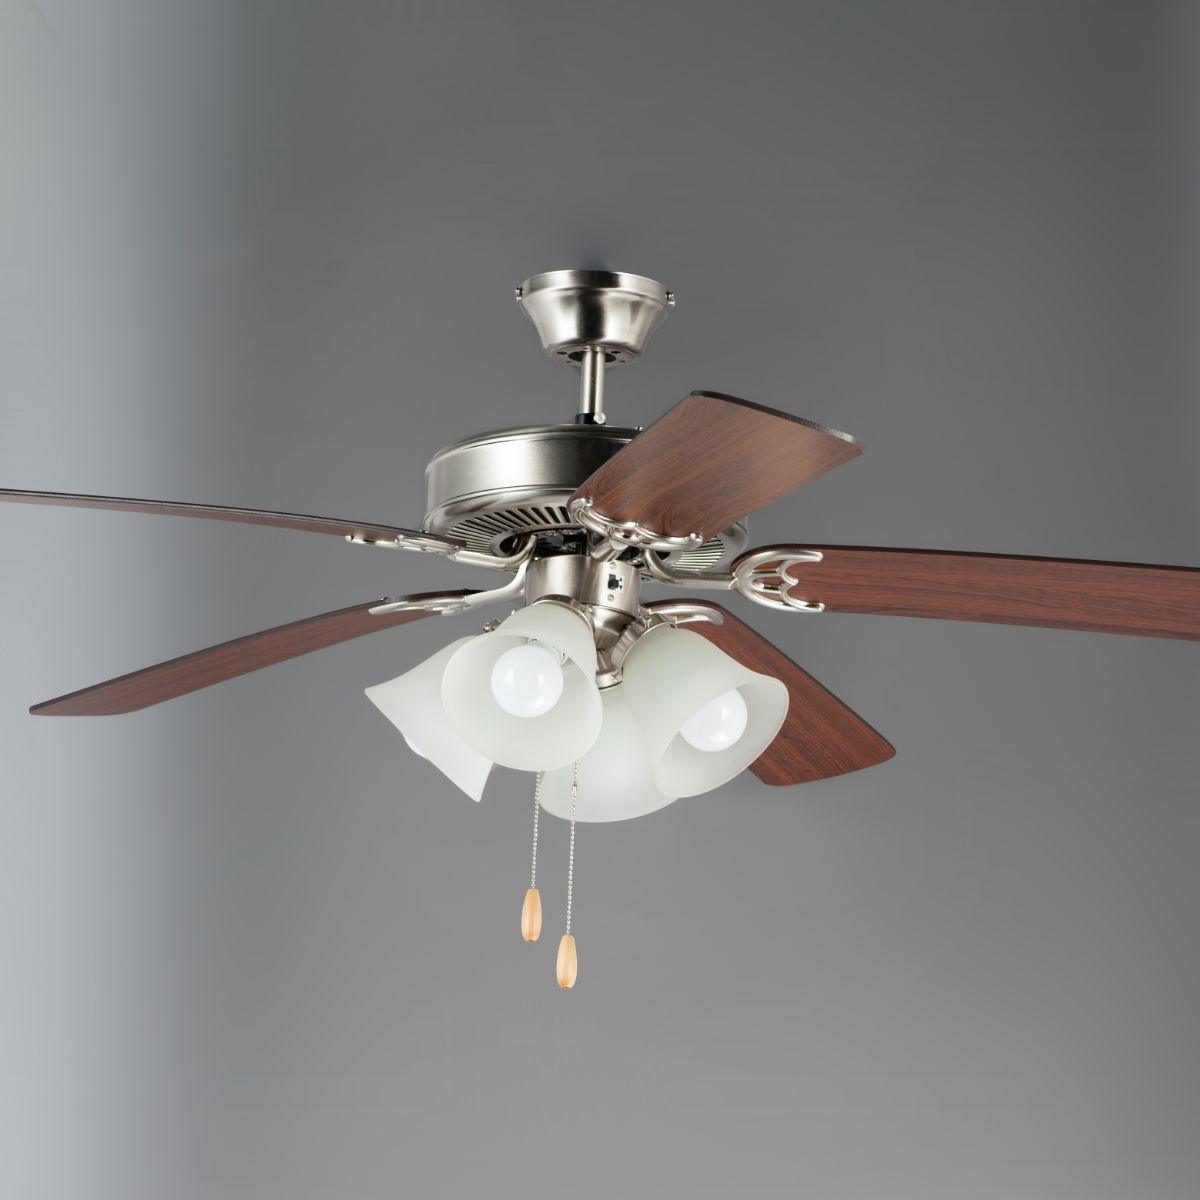 Basic Max 52 Inch Ceiling Fan With Light, Downrod or Flush Mount, Pull Chain Included - Bees Lighting